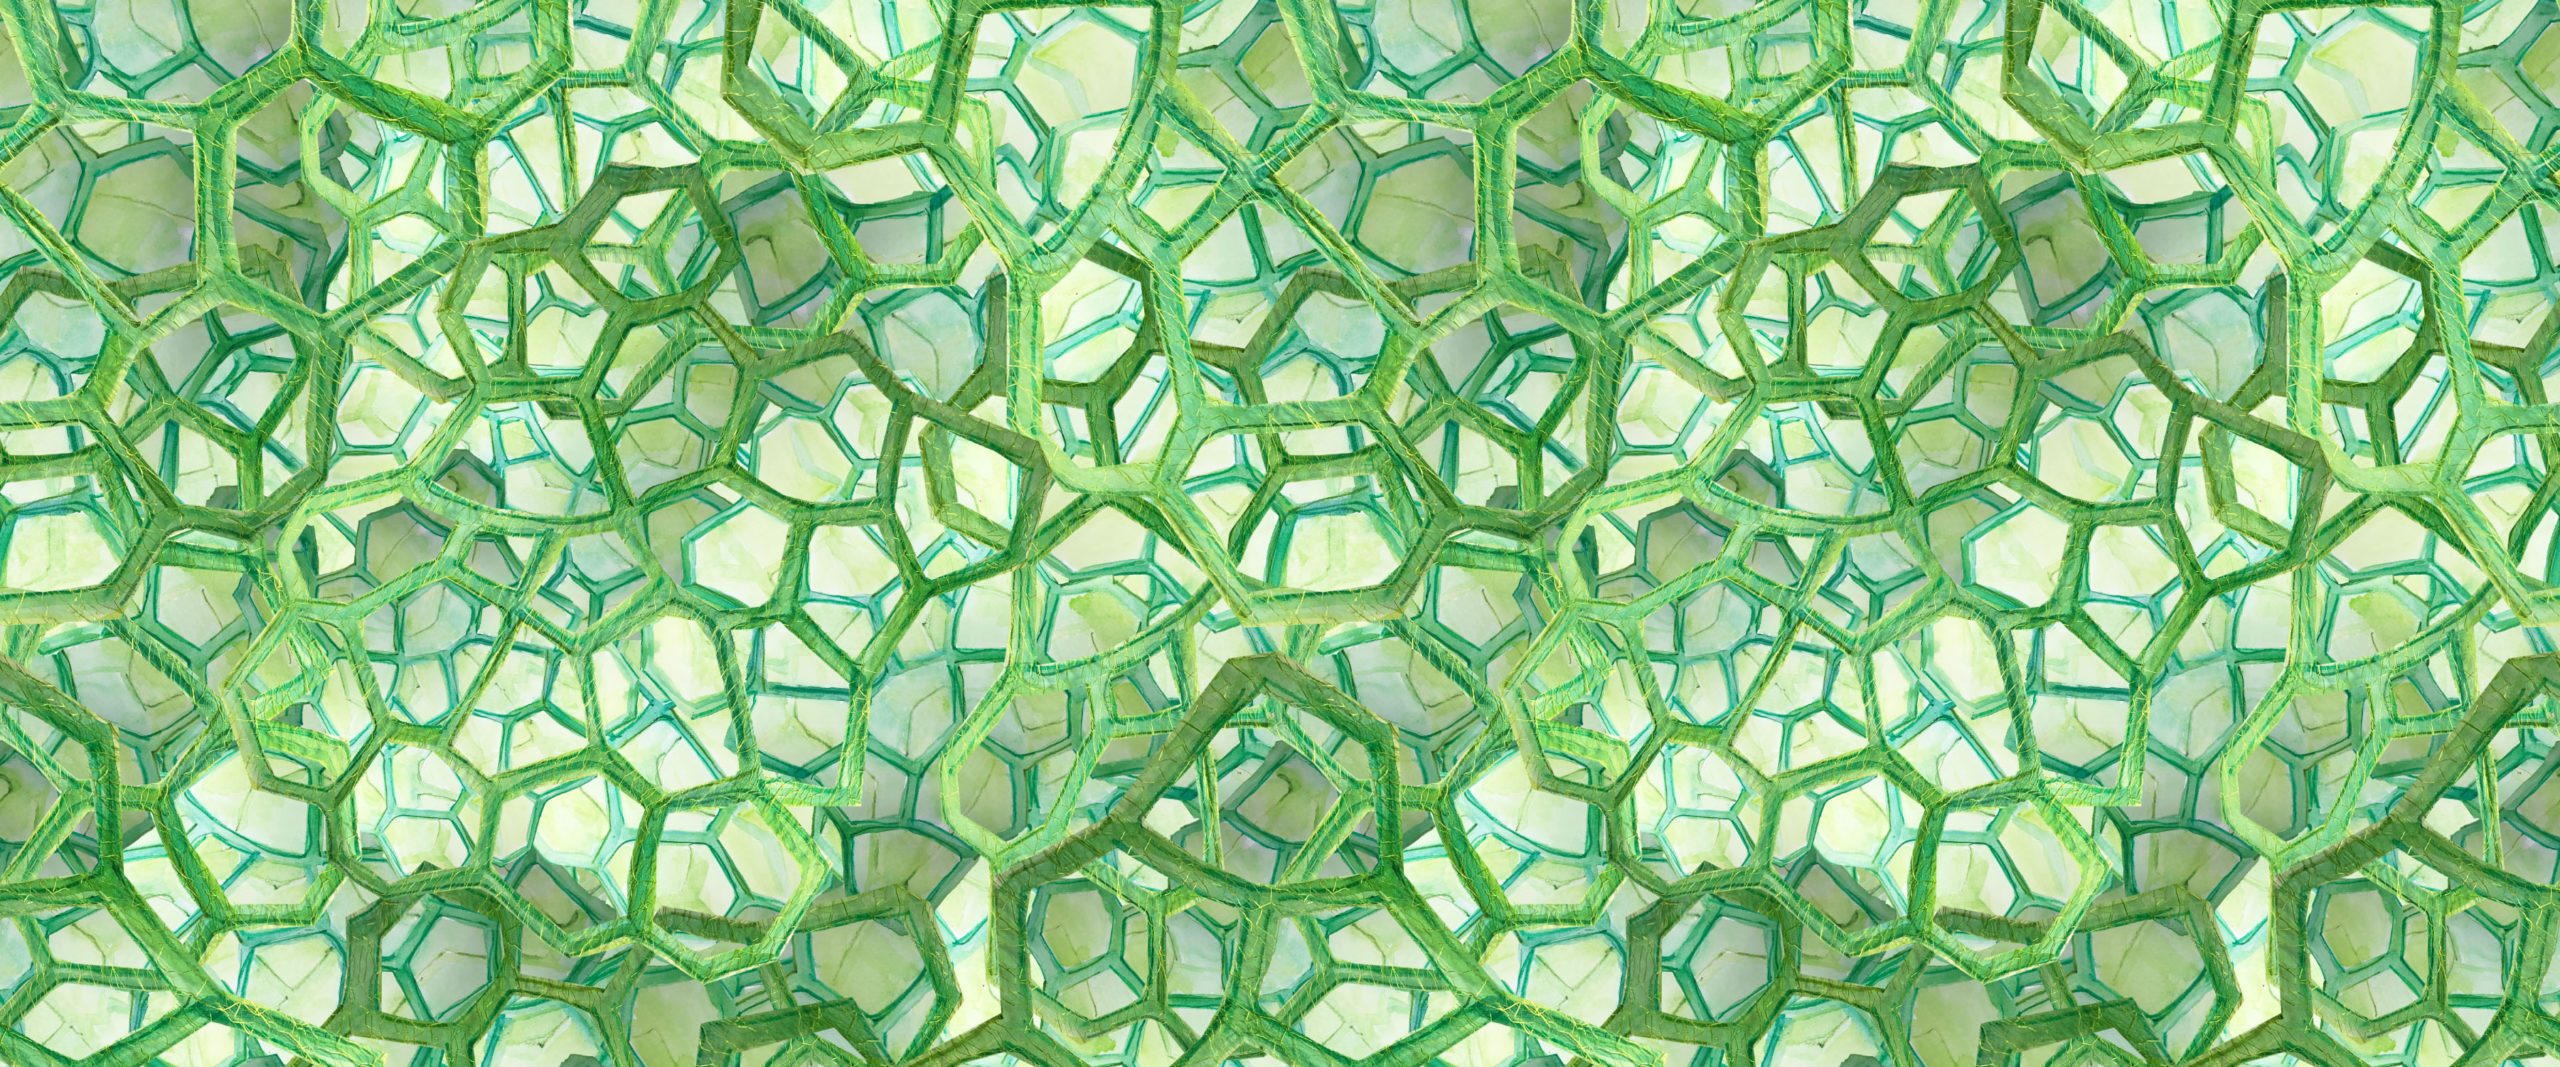 a handpainted watercolor textile design of chlorophyll cells